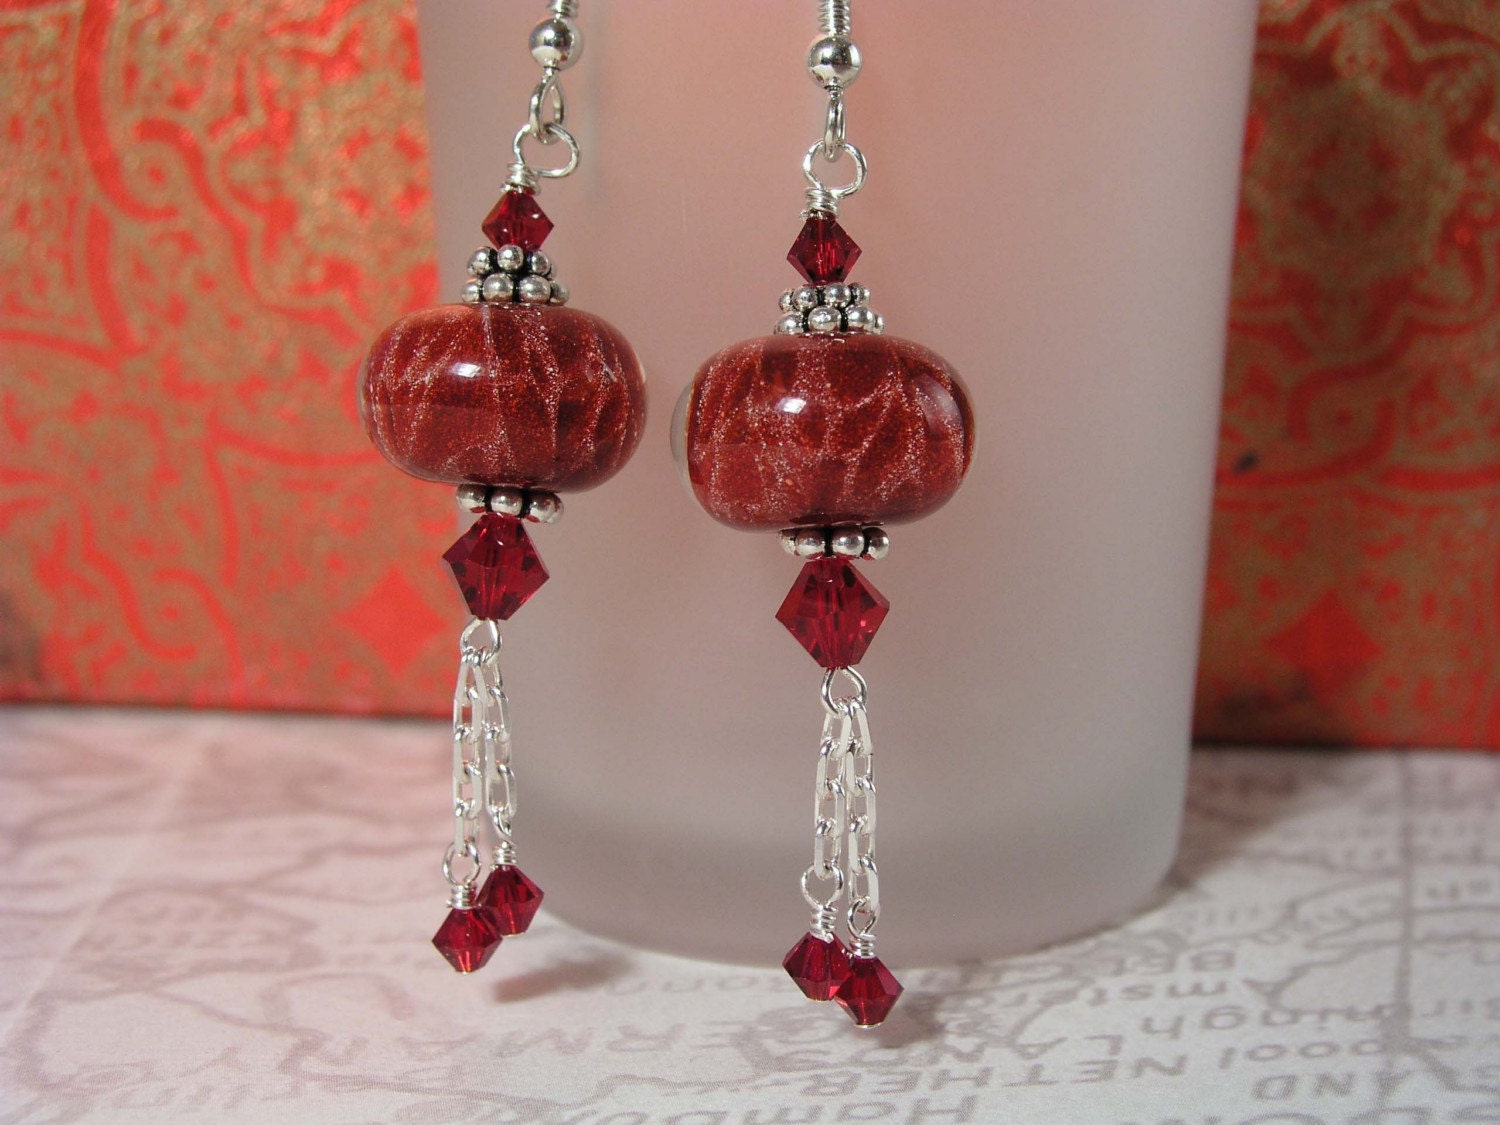 GALLAXY..Artisan Lampwork Beads, Sterling Silver Chain, Bali, Swarovski Crystals, and Sterling Silver Earrings